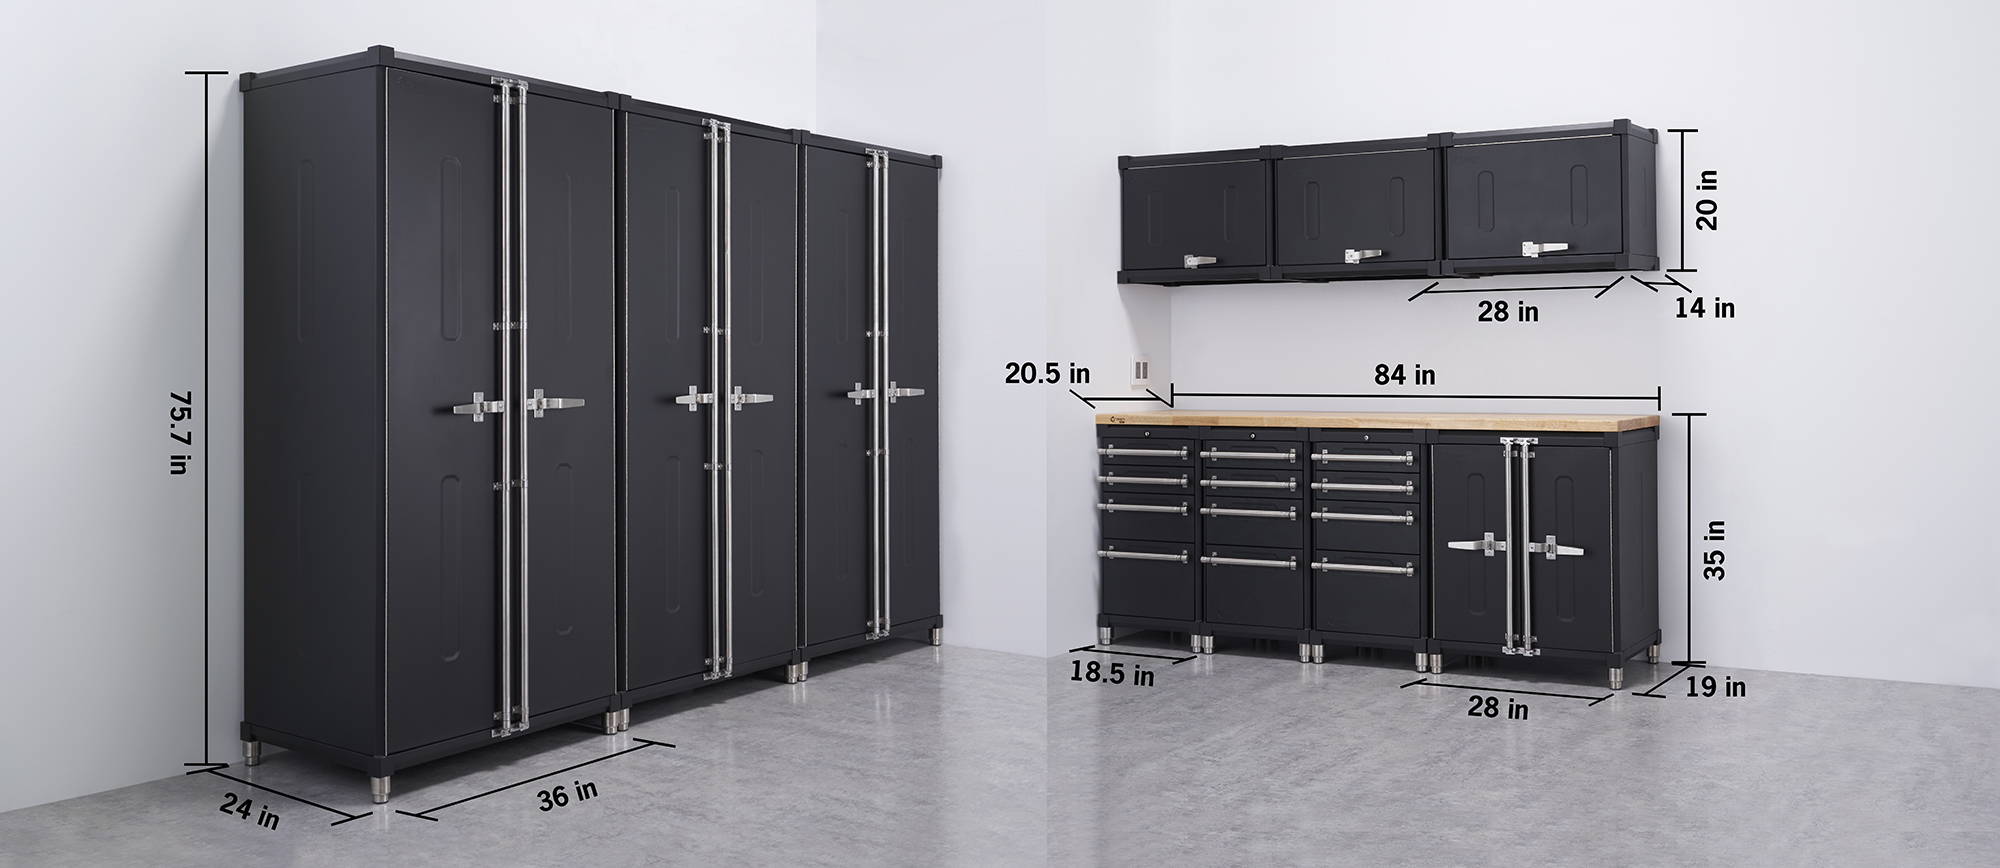 overall dimensions of cabinets, scroll down for details on each piece